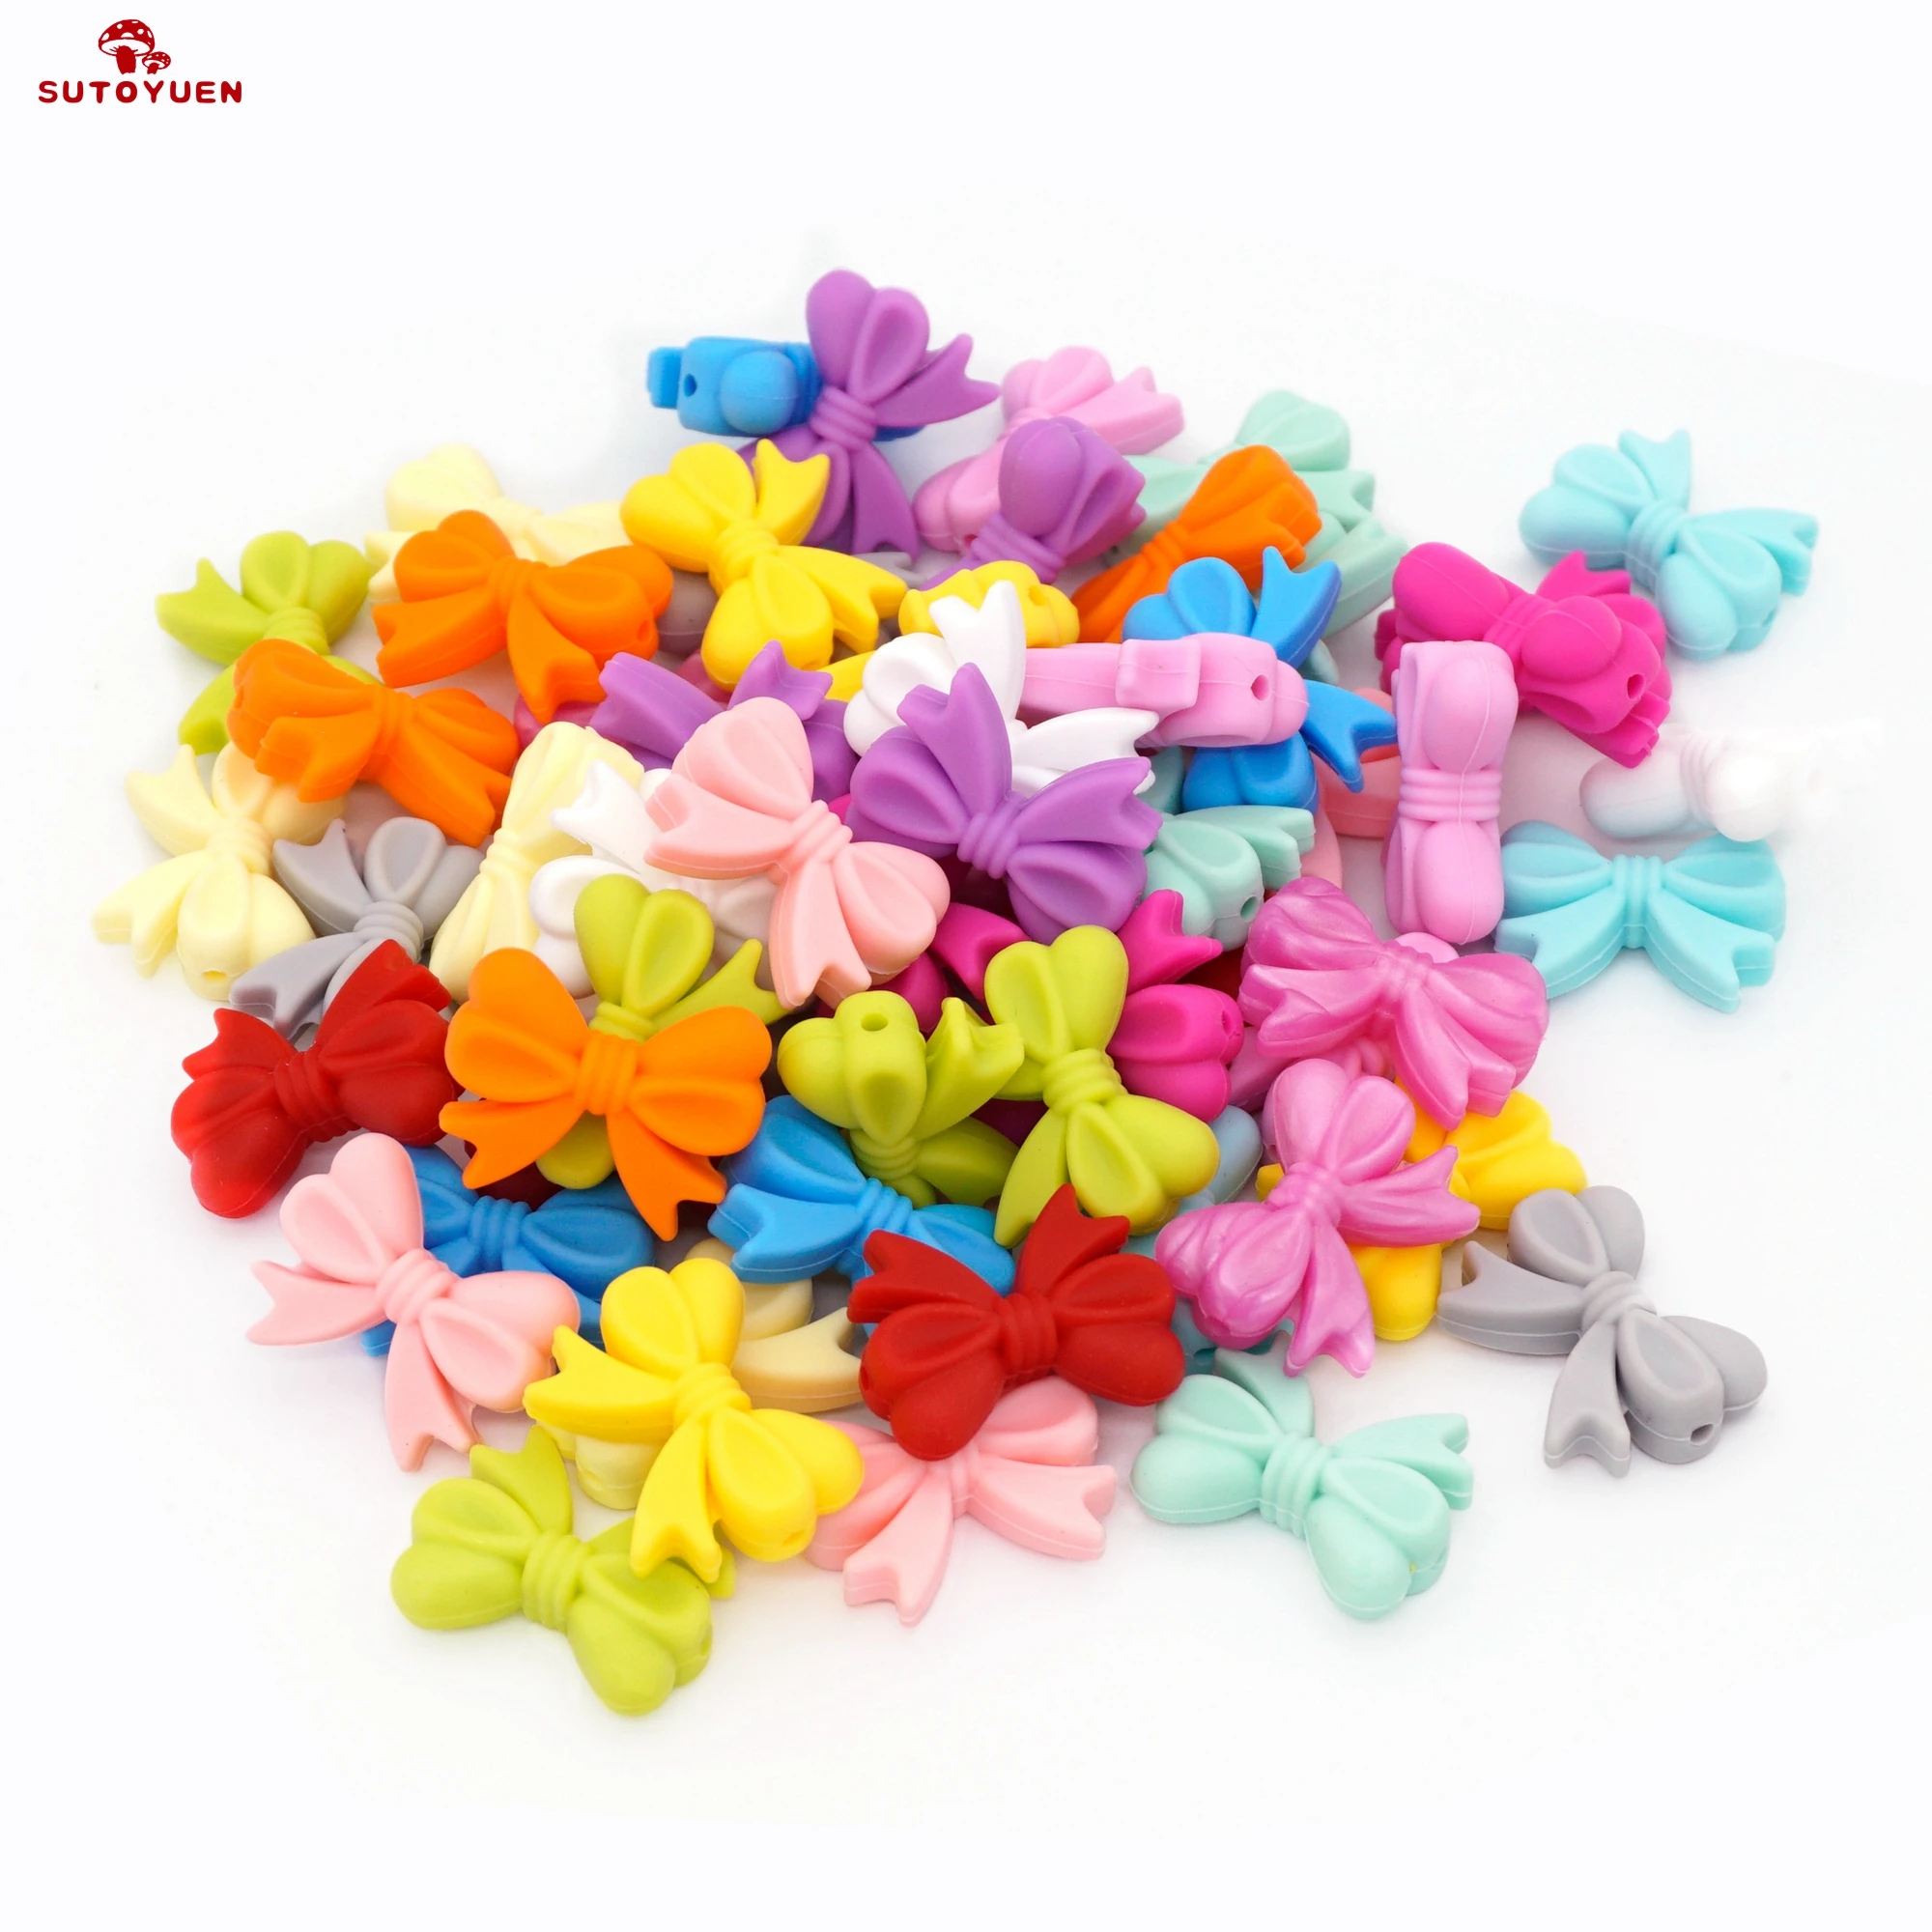 Sutoyuen 200Pcs Bow Silicone Beads BPA Free DIY Pacifier Necklace Safe Sensory Toy Chewable Silicone Baby Teething Beads Bowknot